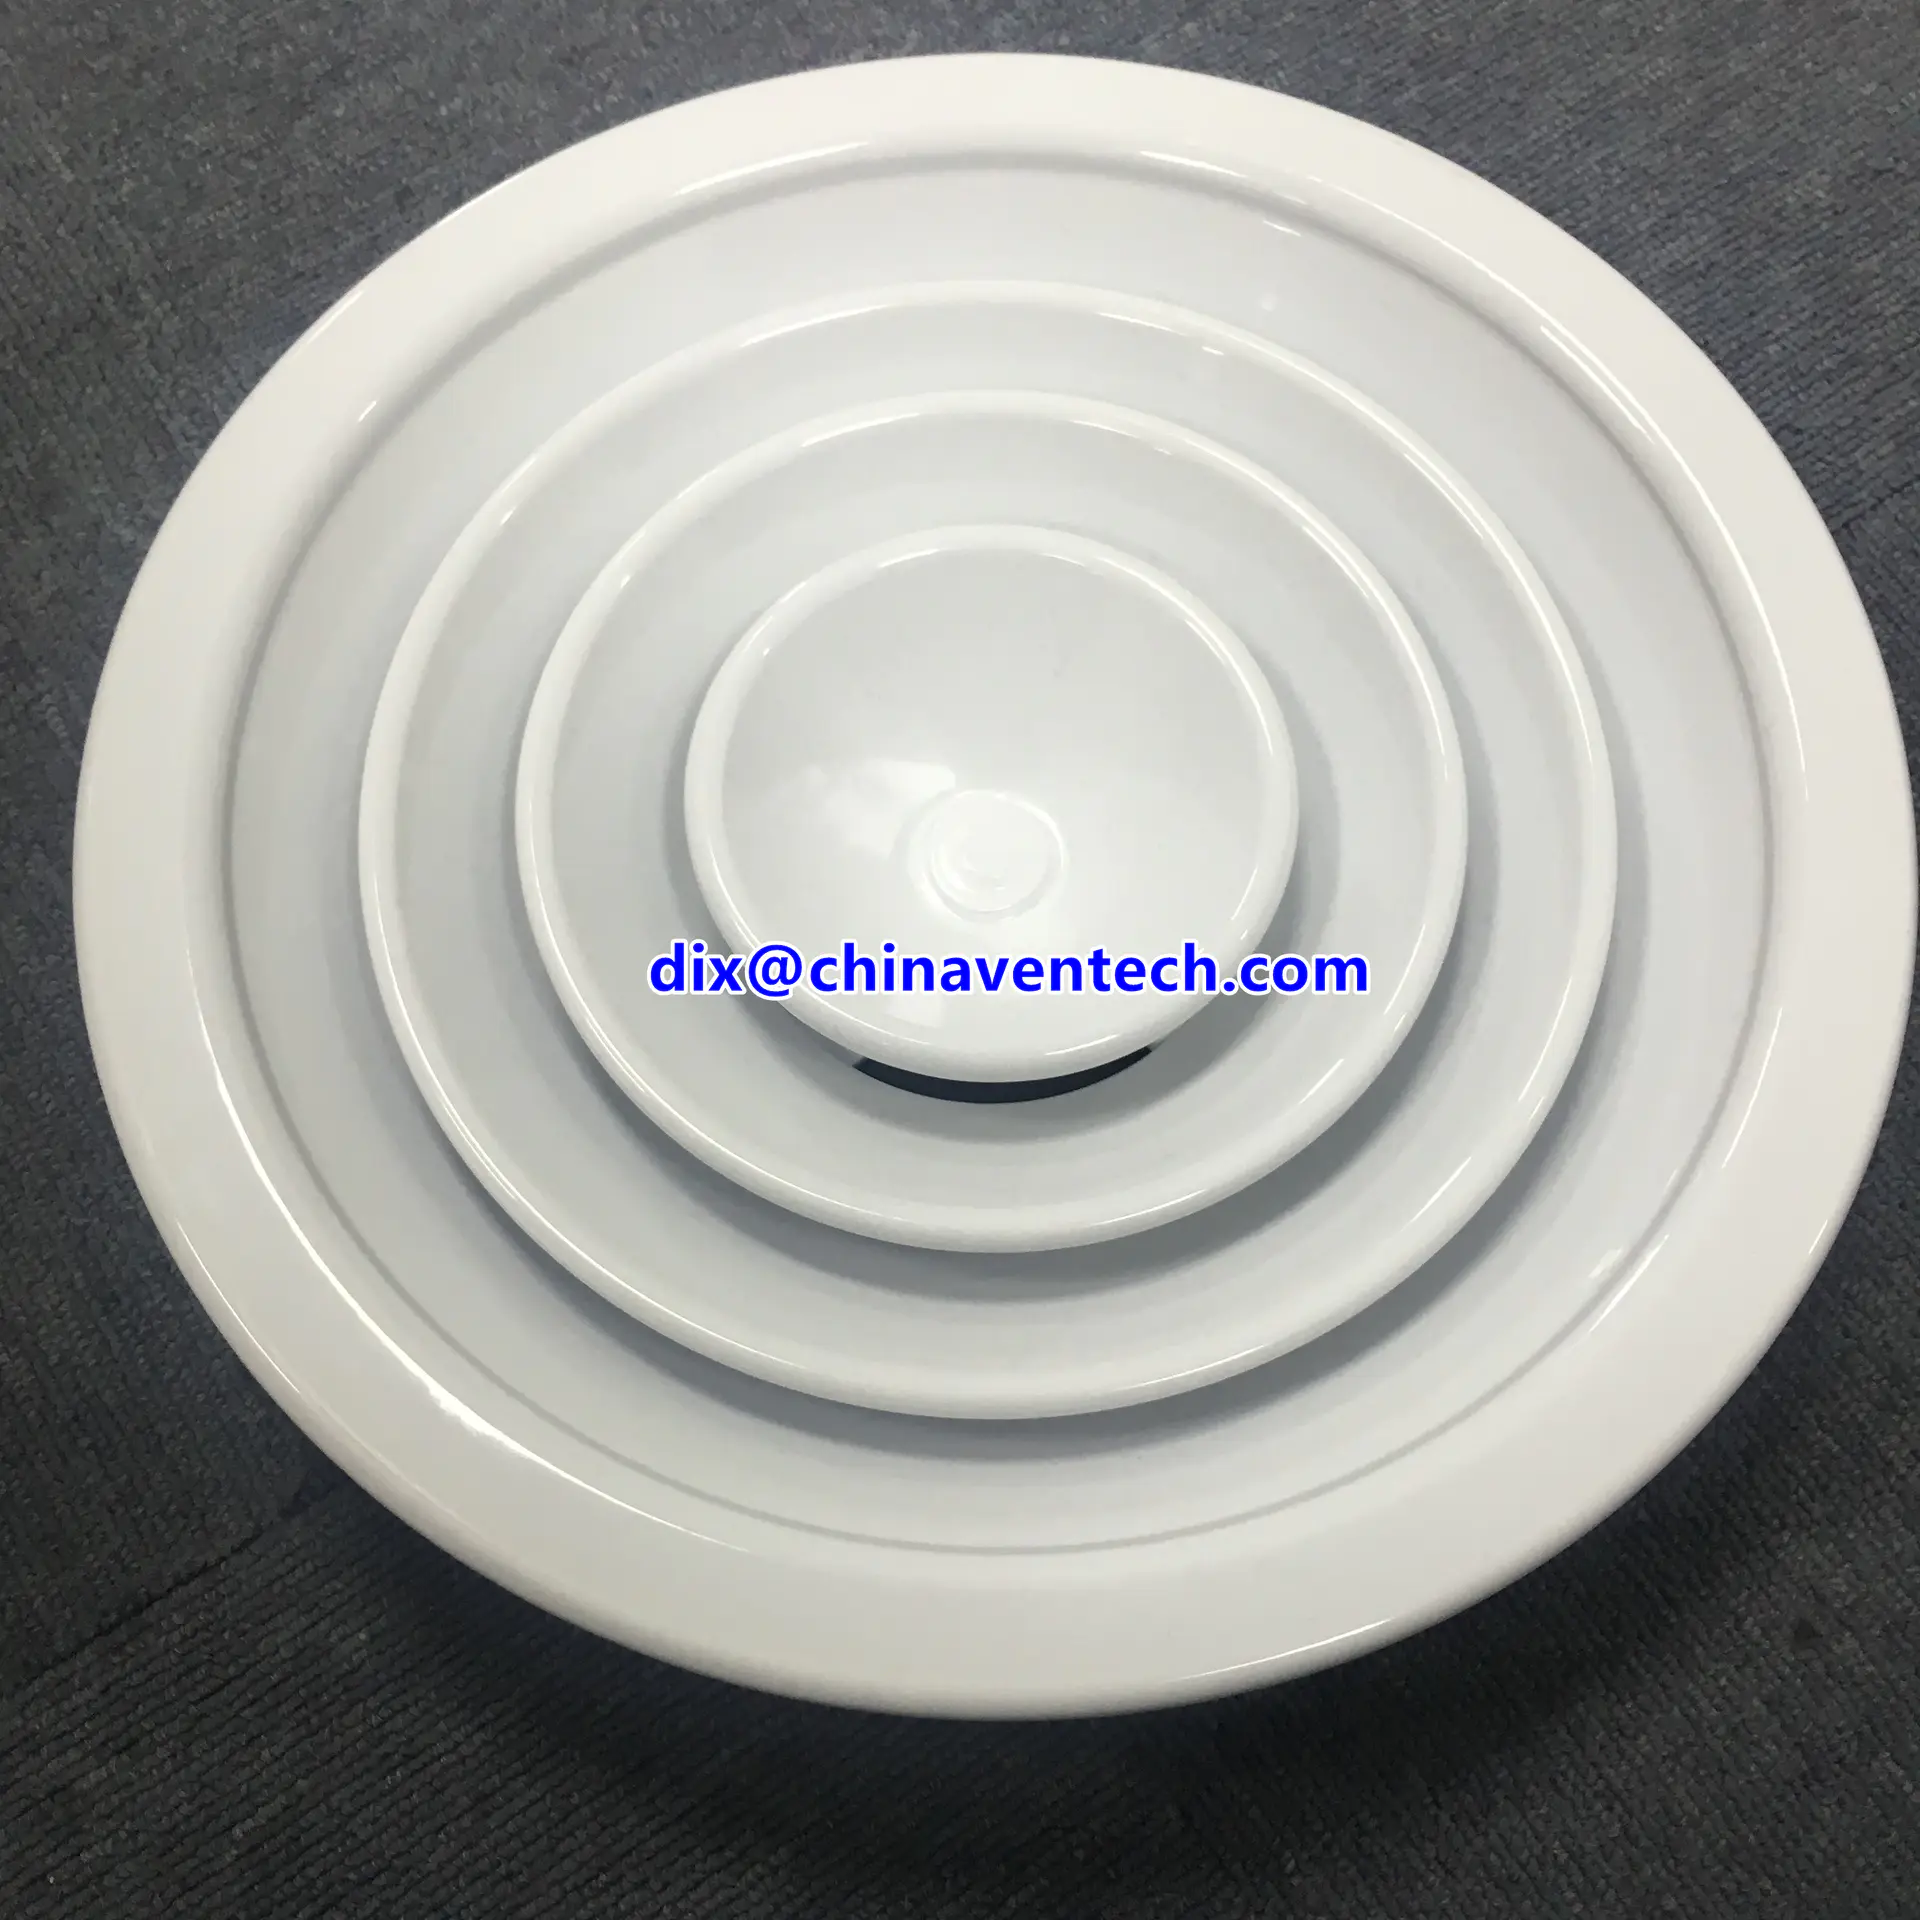 Hvac System Ducting Vent Diffuser Parts Hot Sale Ceiling Round Air Diffusers For Ventilation Used